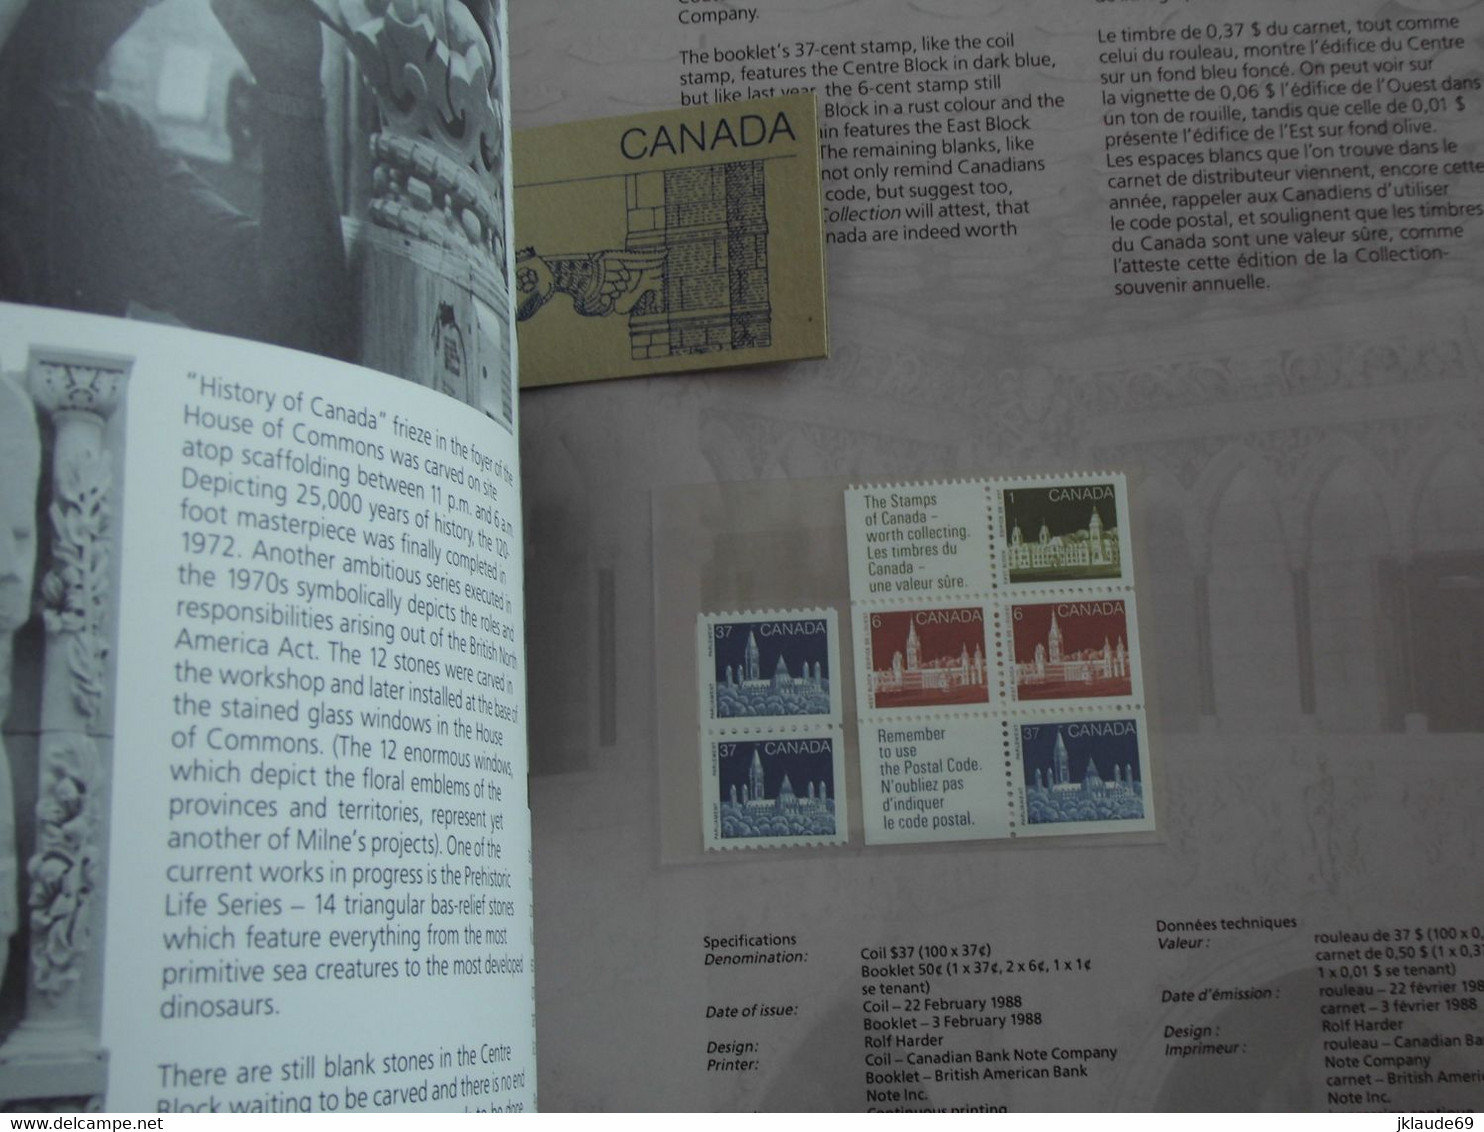 CANADA COLLECTION OF THE POSTAGE STAMPS OF CANADA 1988 LIVRE DE L'ANNEE YEAR BOOK  Complet Avec Timbres Neufs MNH ** - Volledige Jaargang